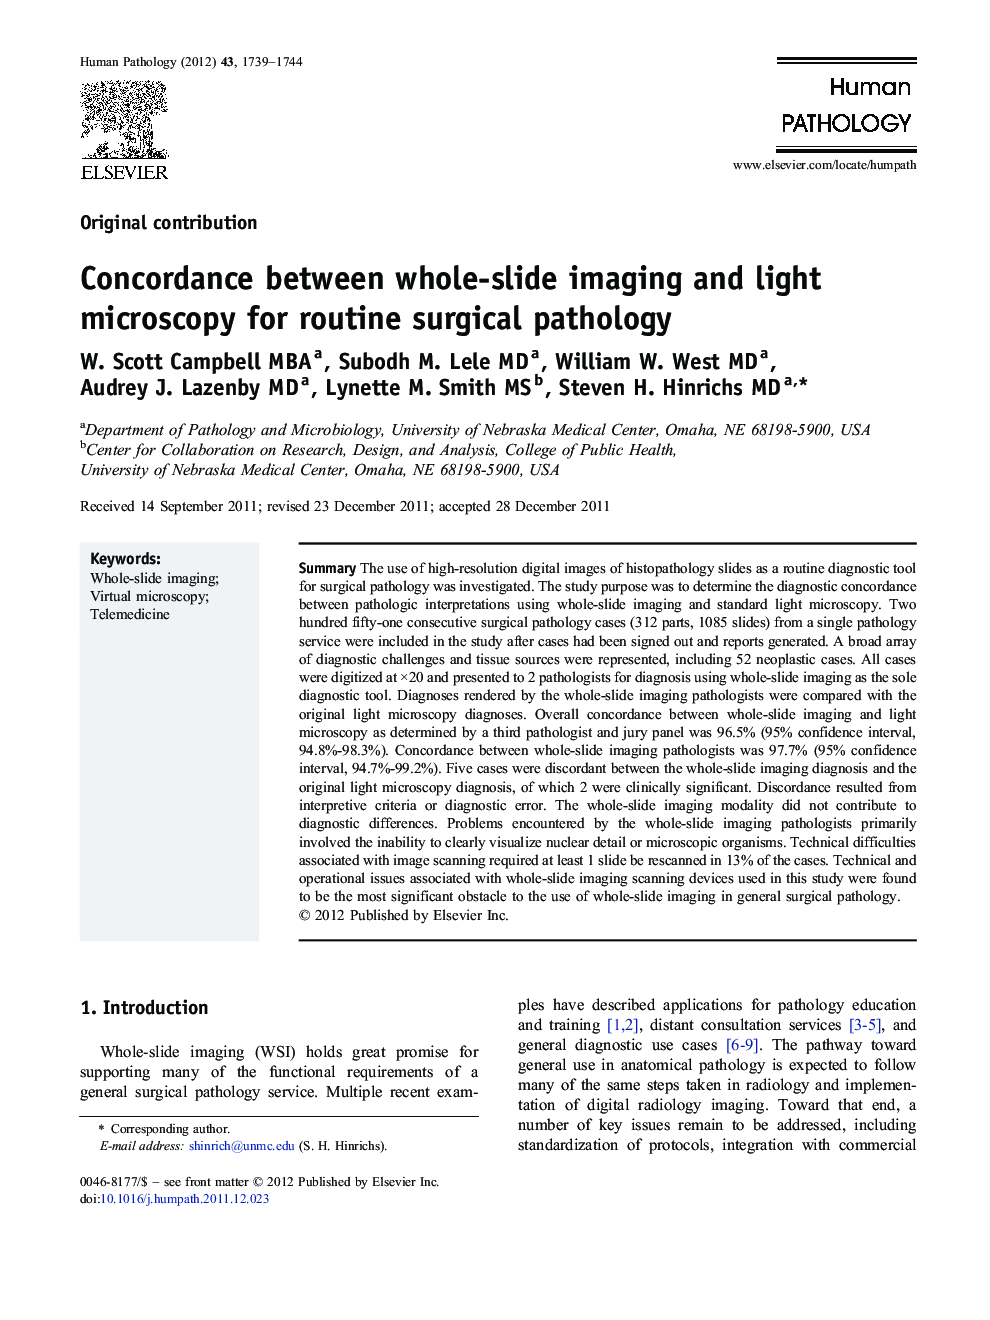 Concordance between whole-slide imaging and light microscopy for routine surgical pathology